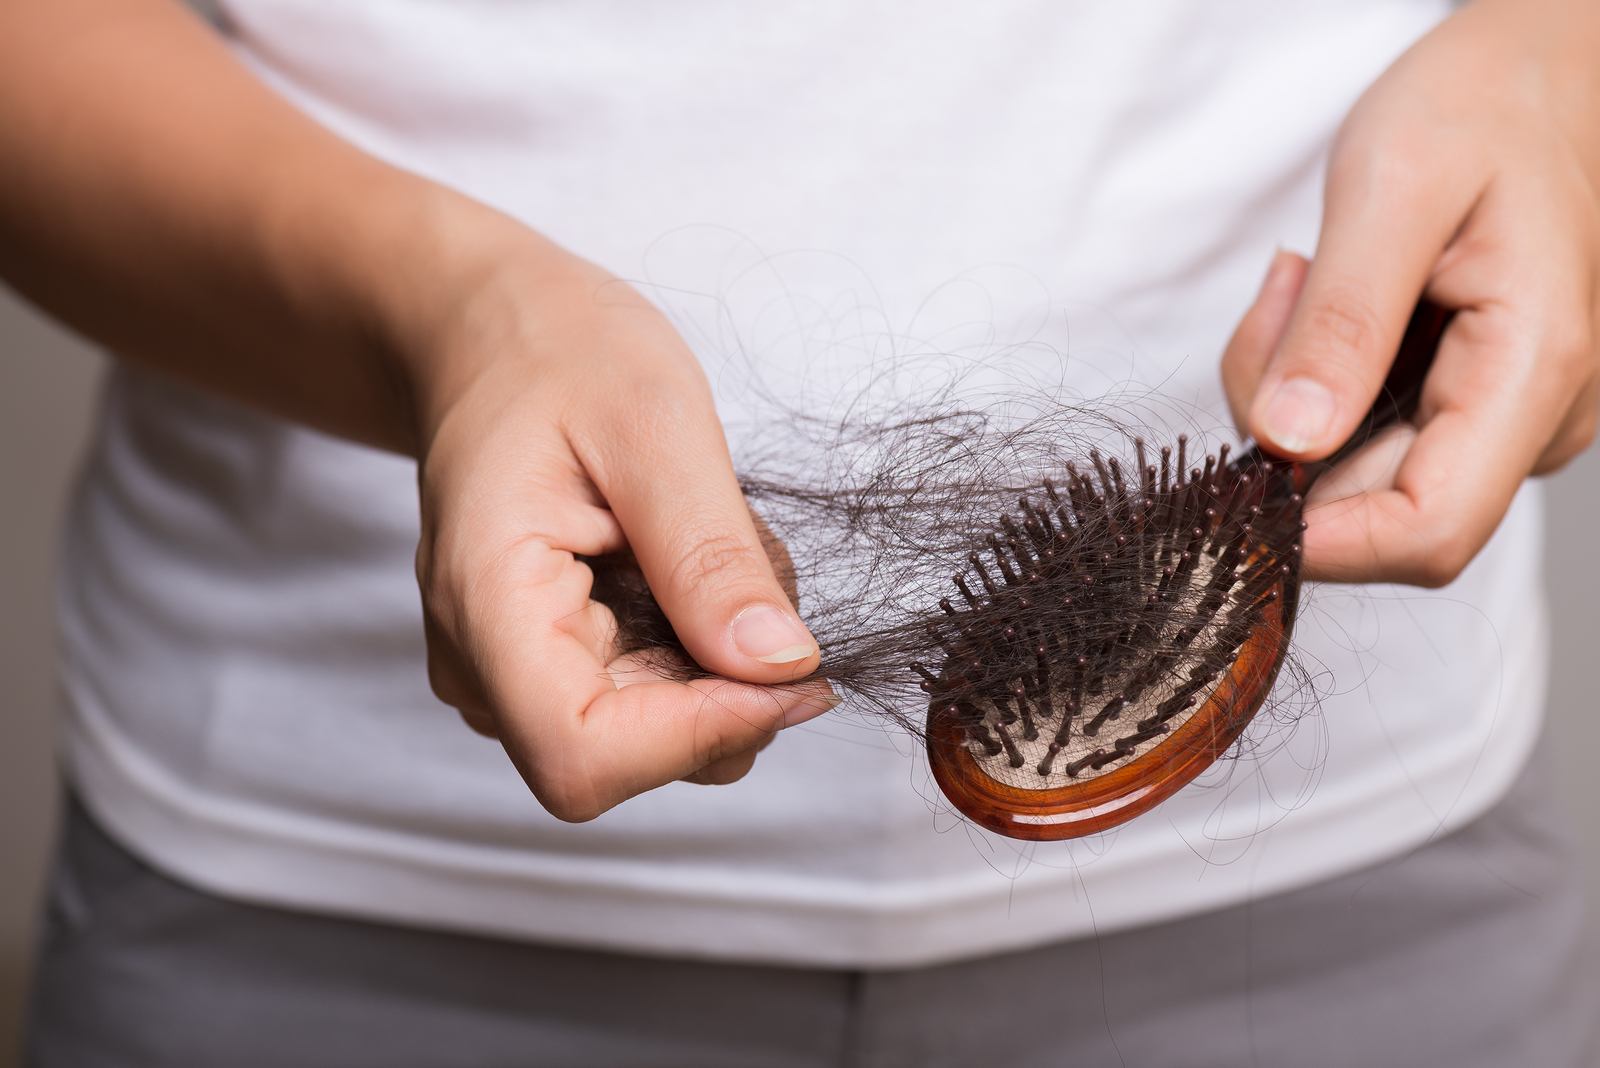 Hair being pulled from a hair brush by a woman